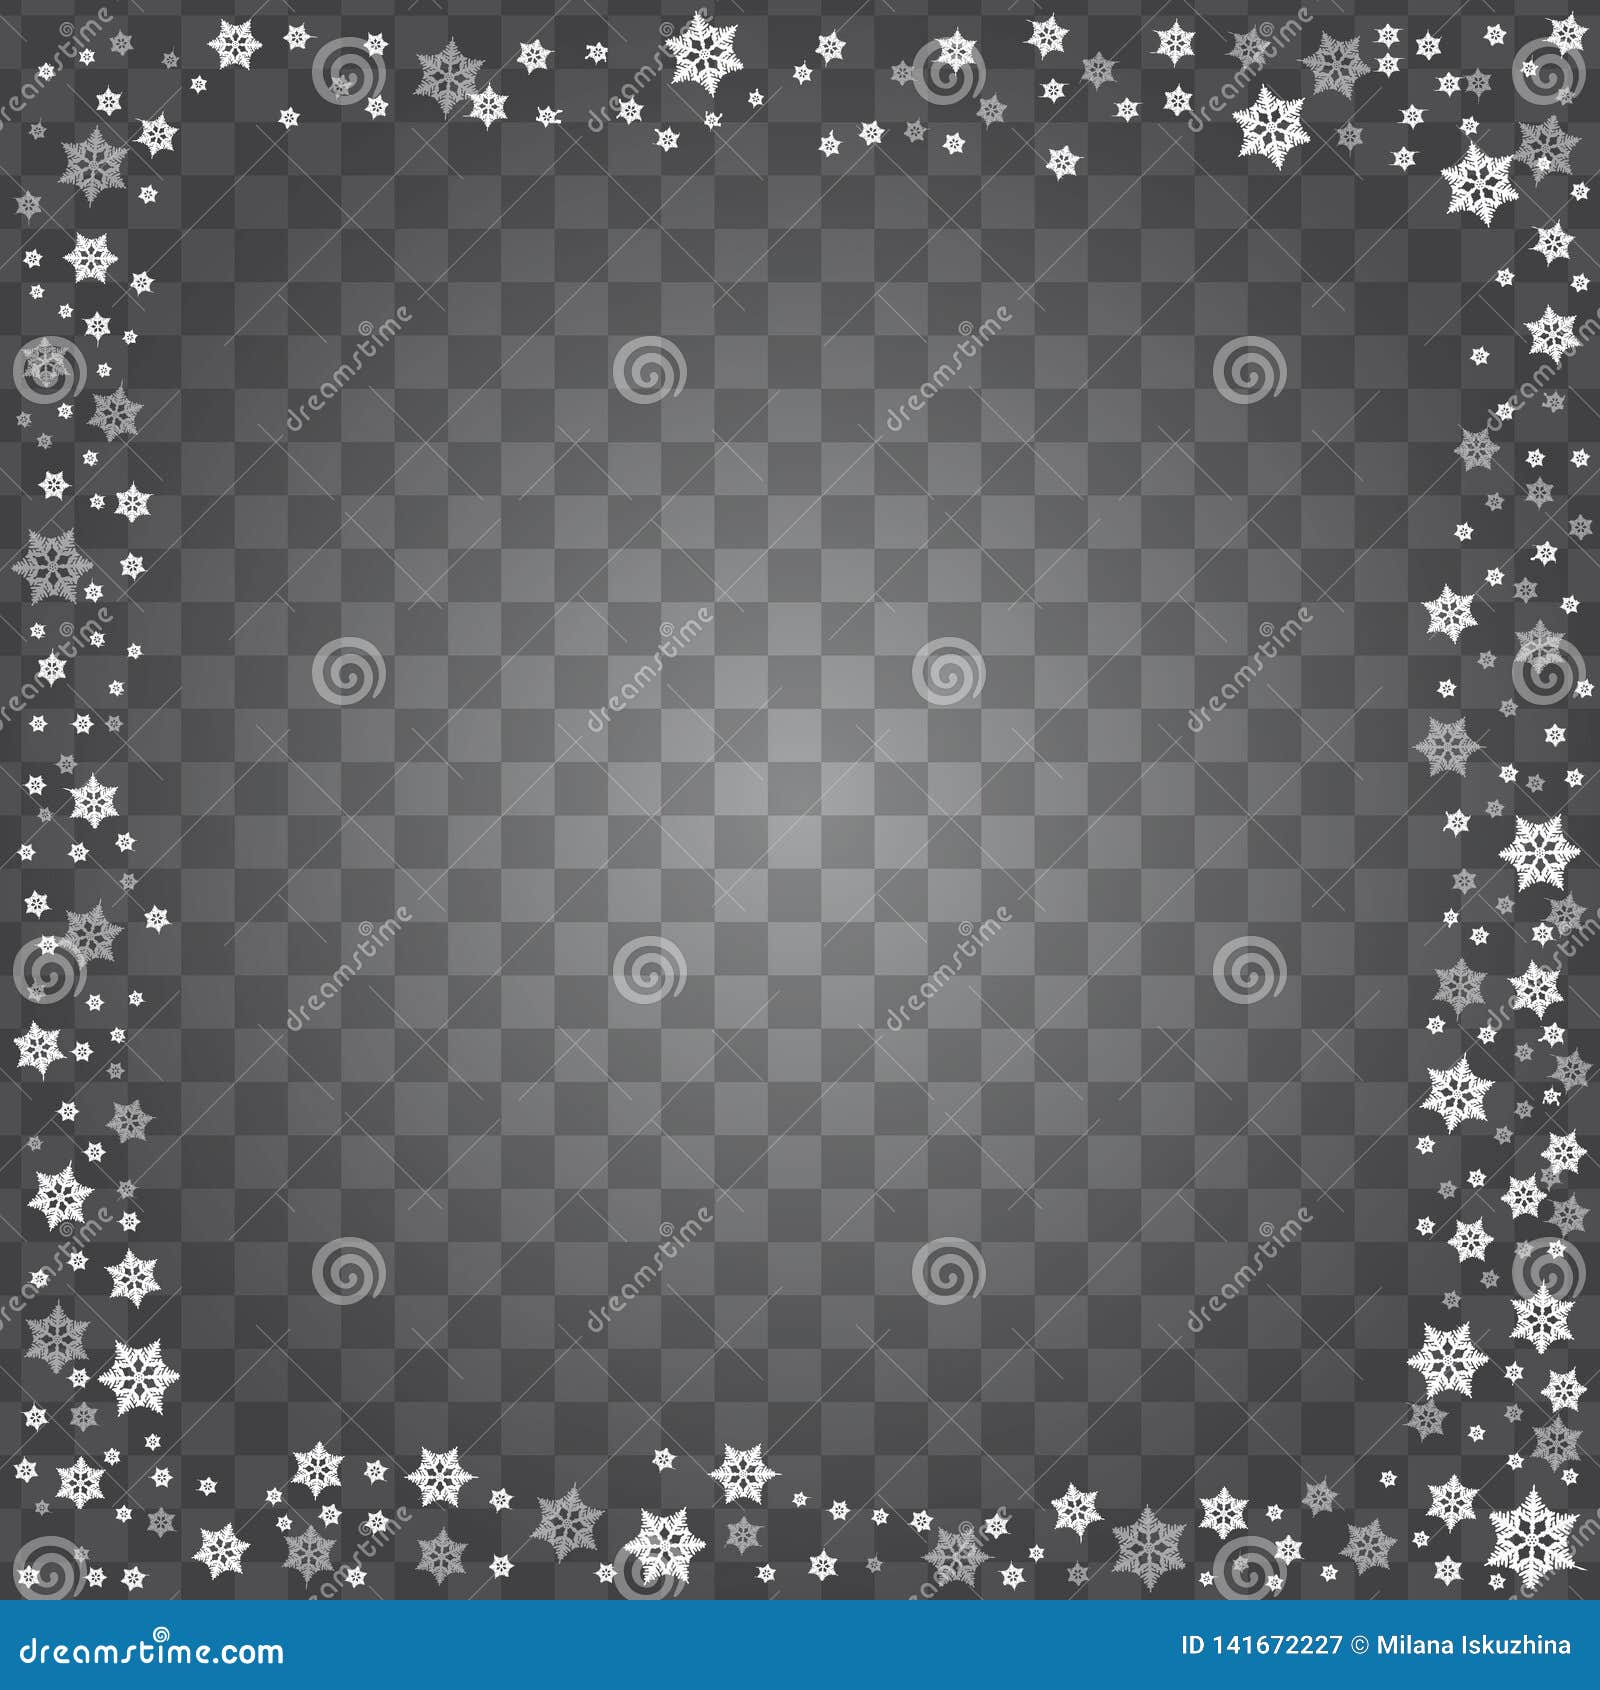 Snowflake Border Vector Isolated on Transparent Background Stock Vector ...